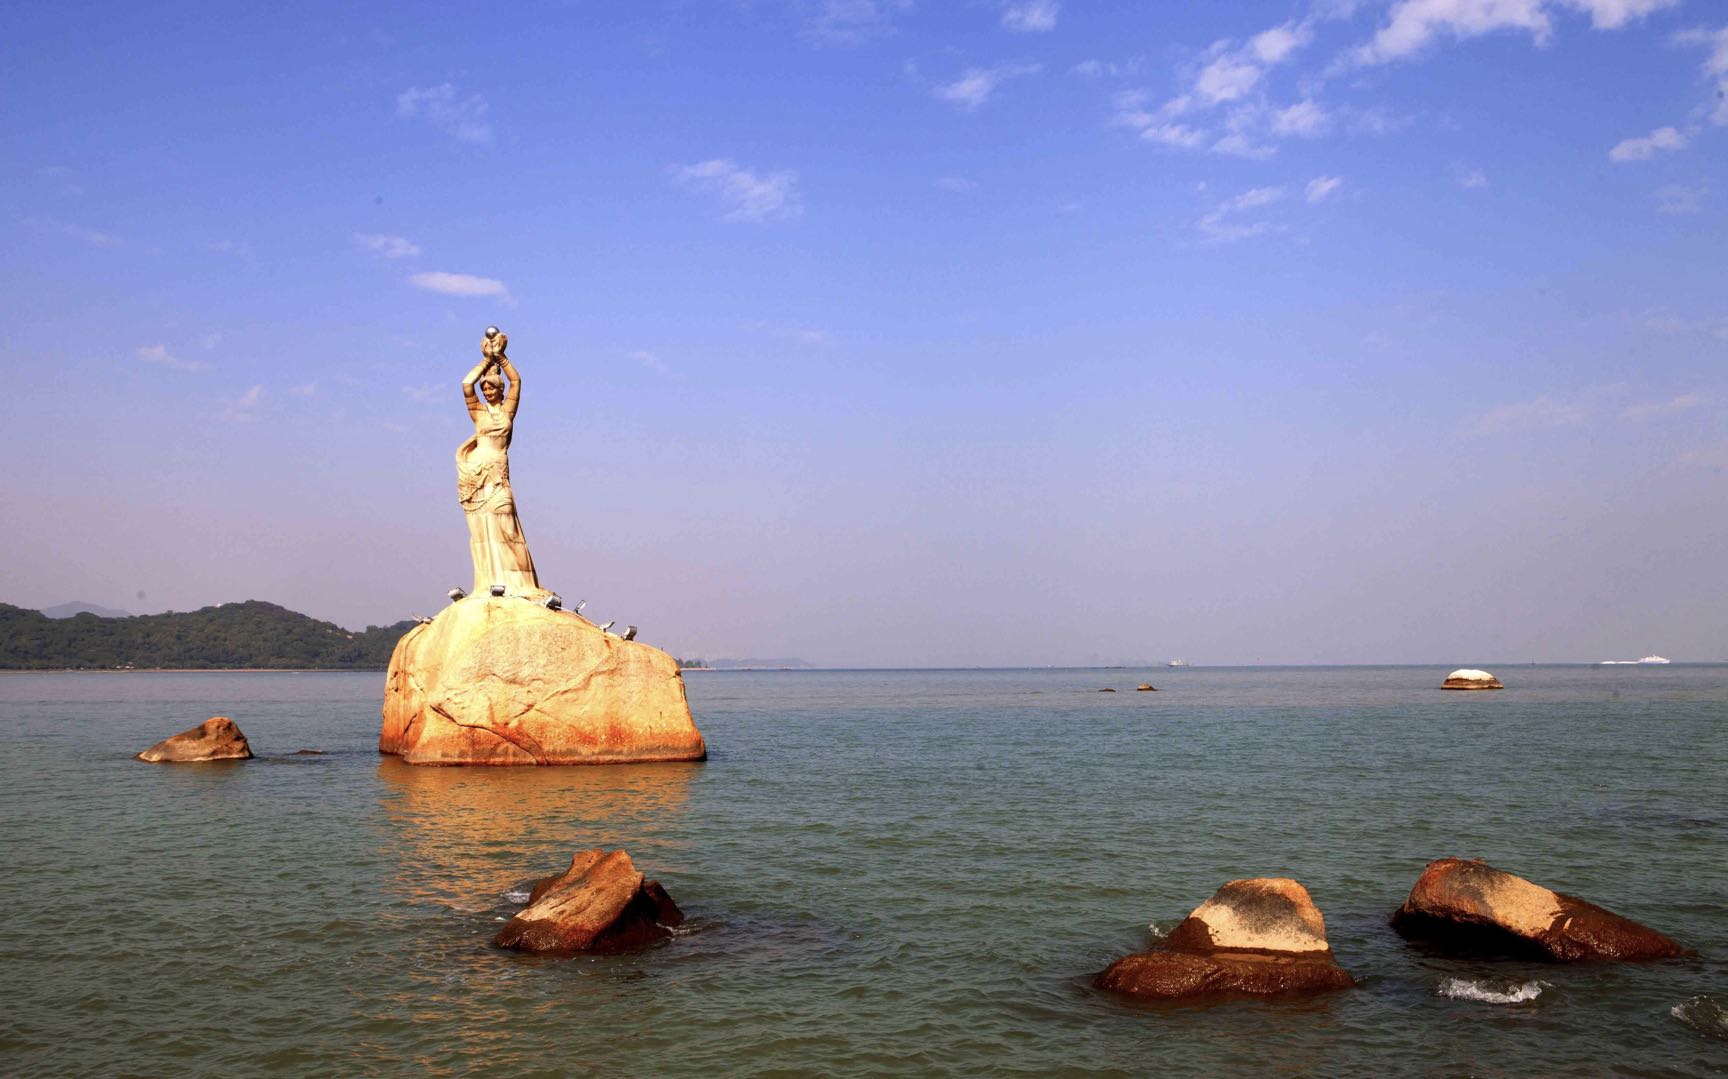 Statue of the Fisher Girl, one of the most well known symbols of the city of Zhuhai